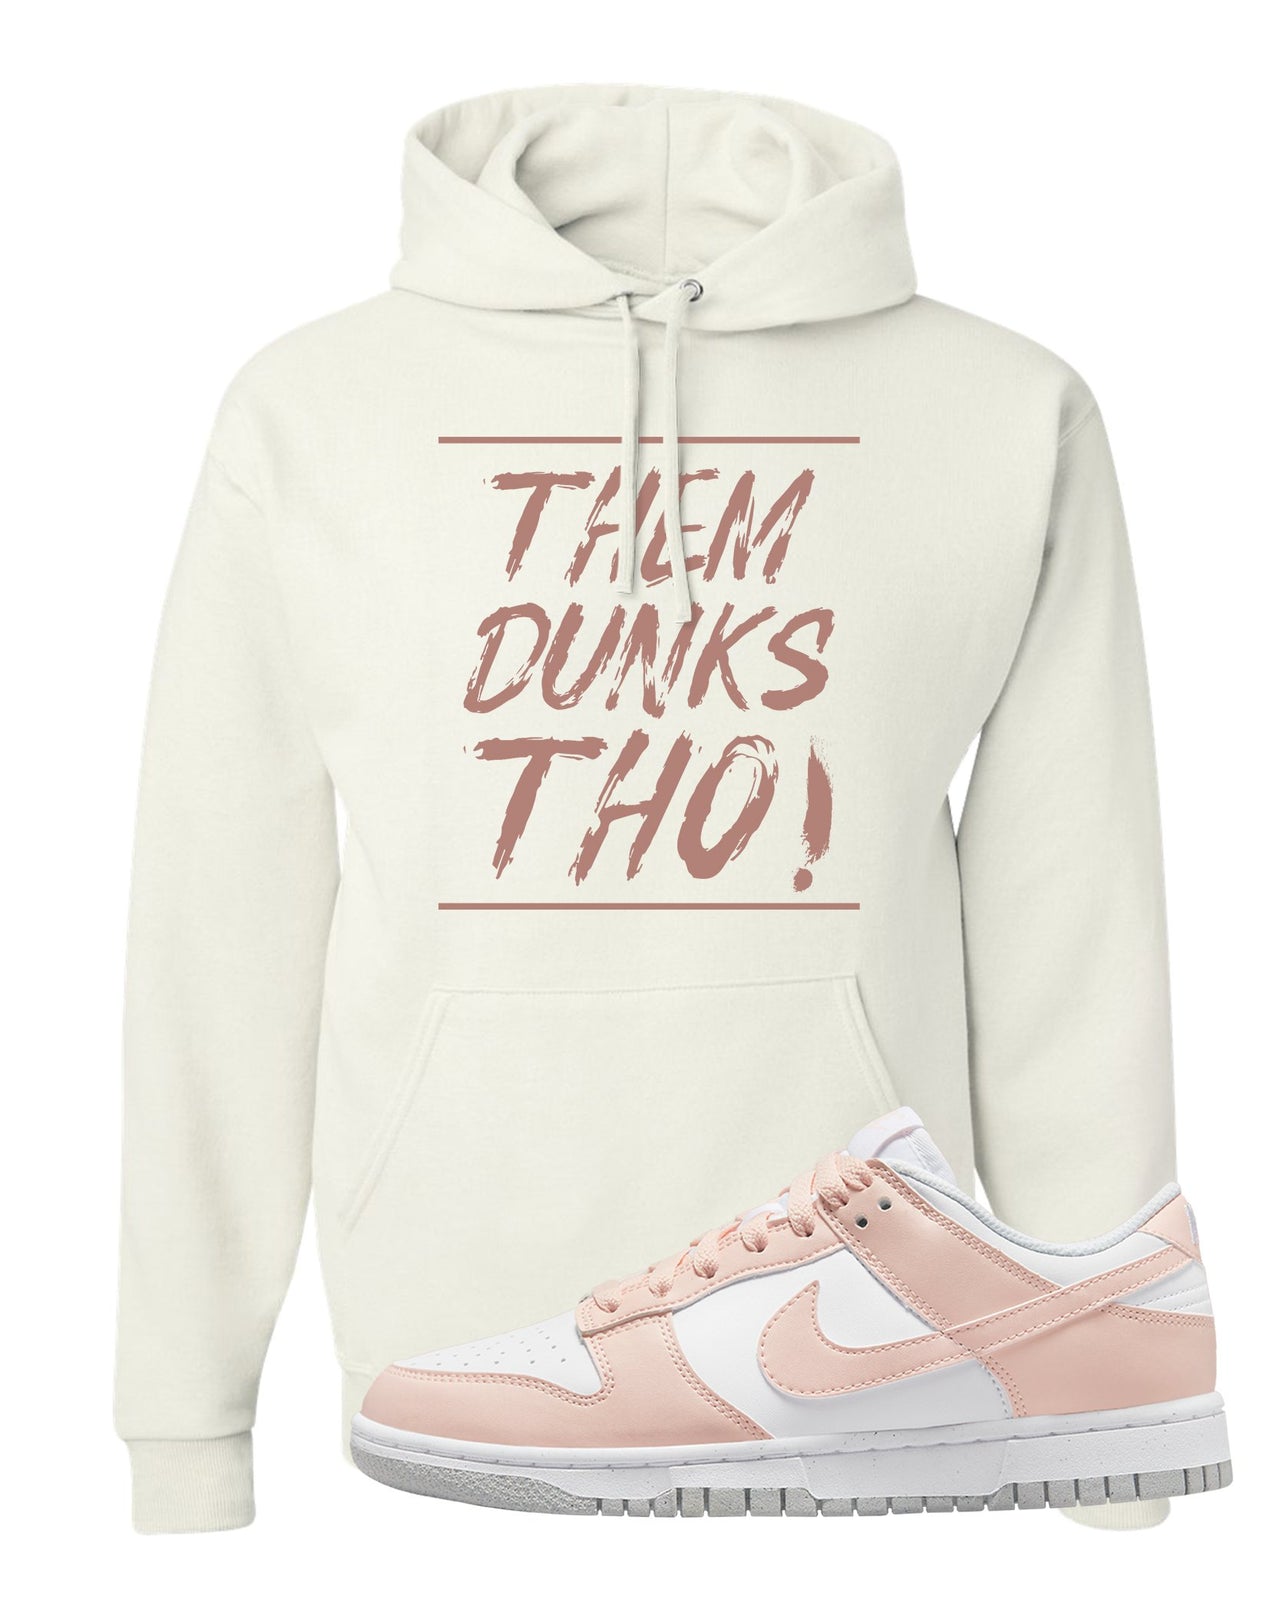 Next Nature Pale Citrus Low Dunks Hoodie | Them Dunks Tho, White